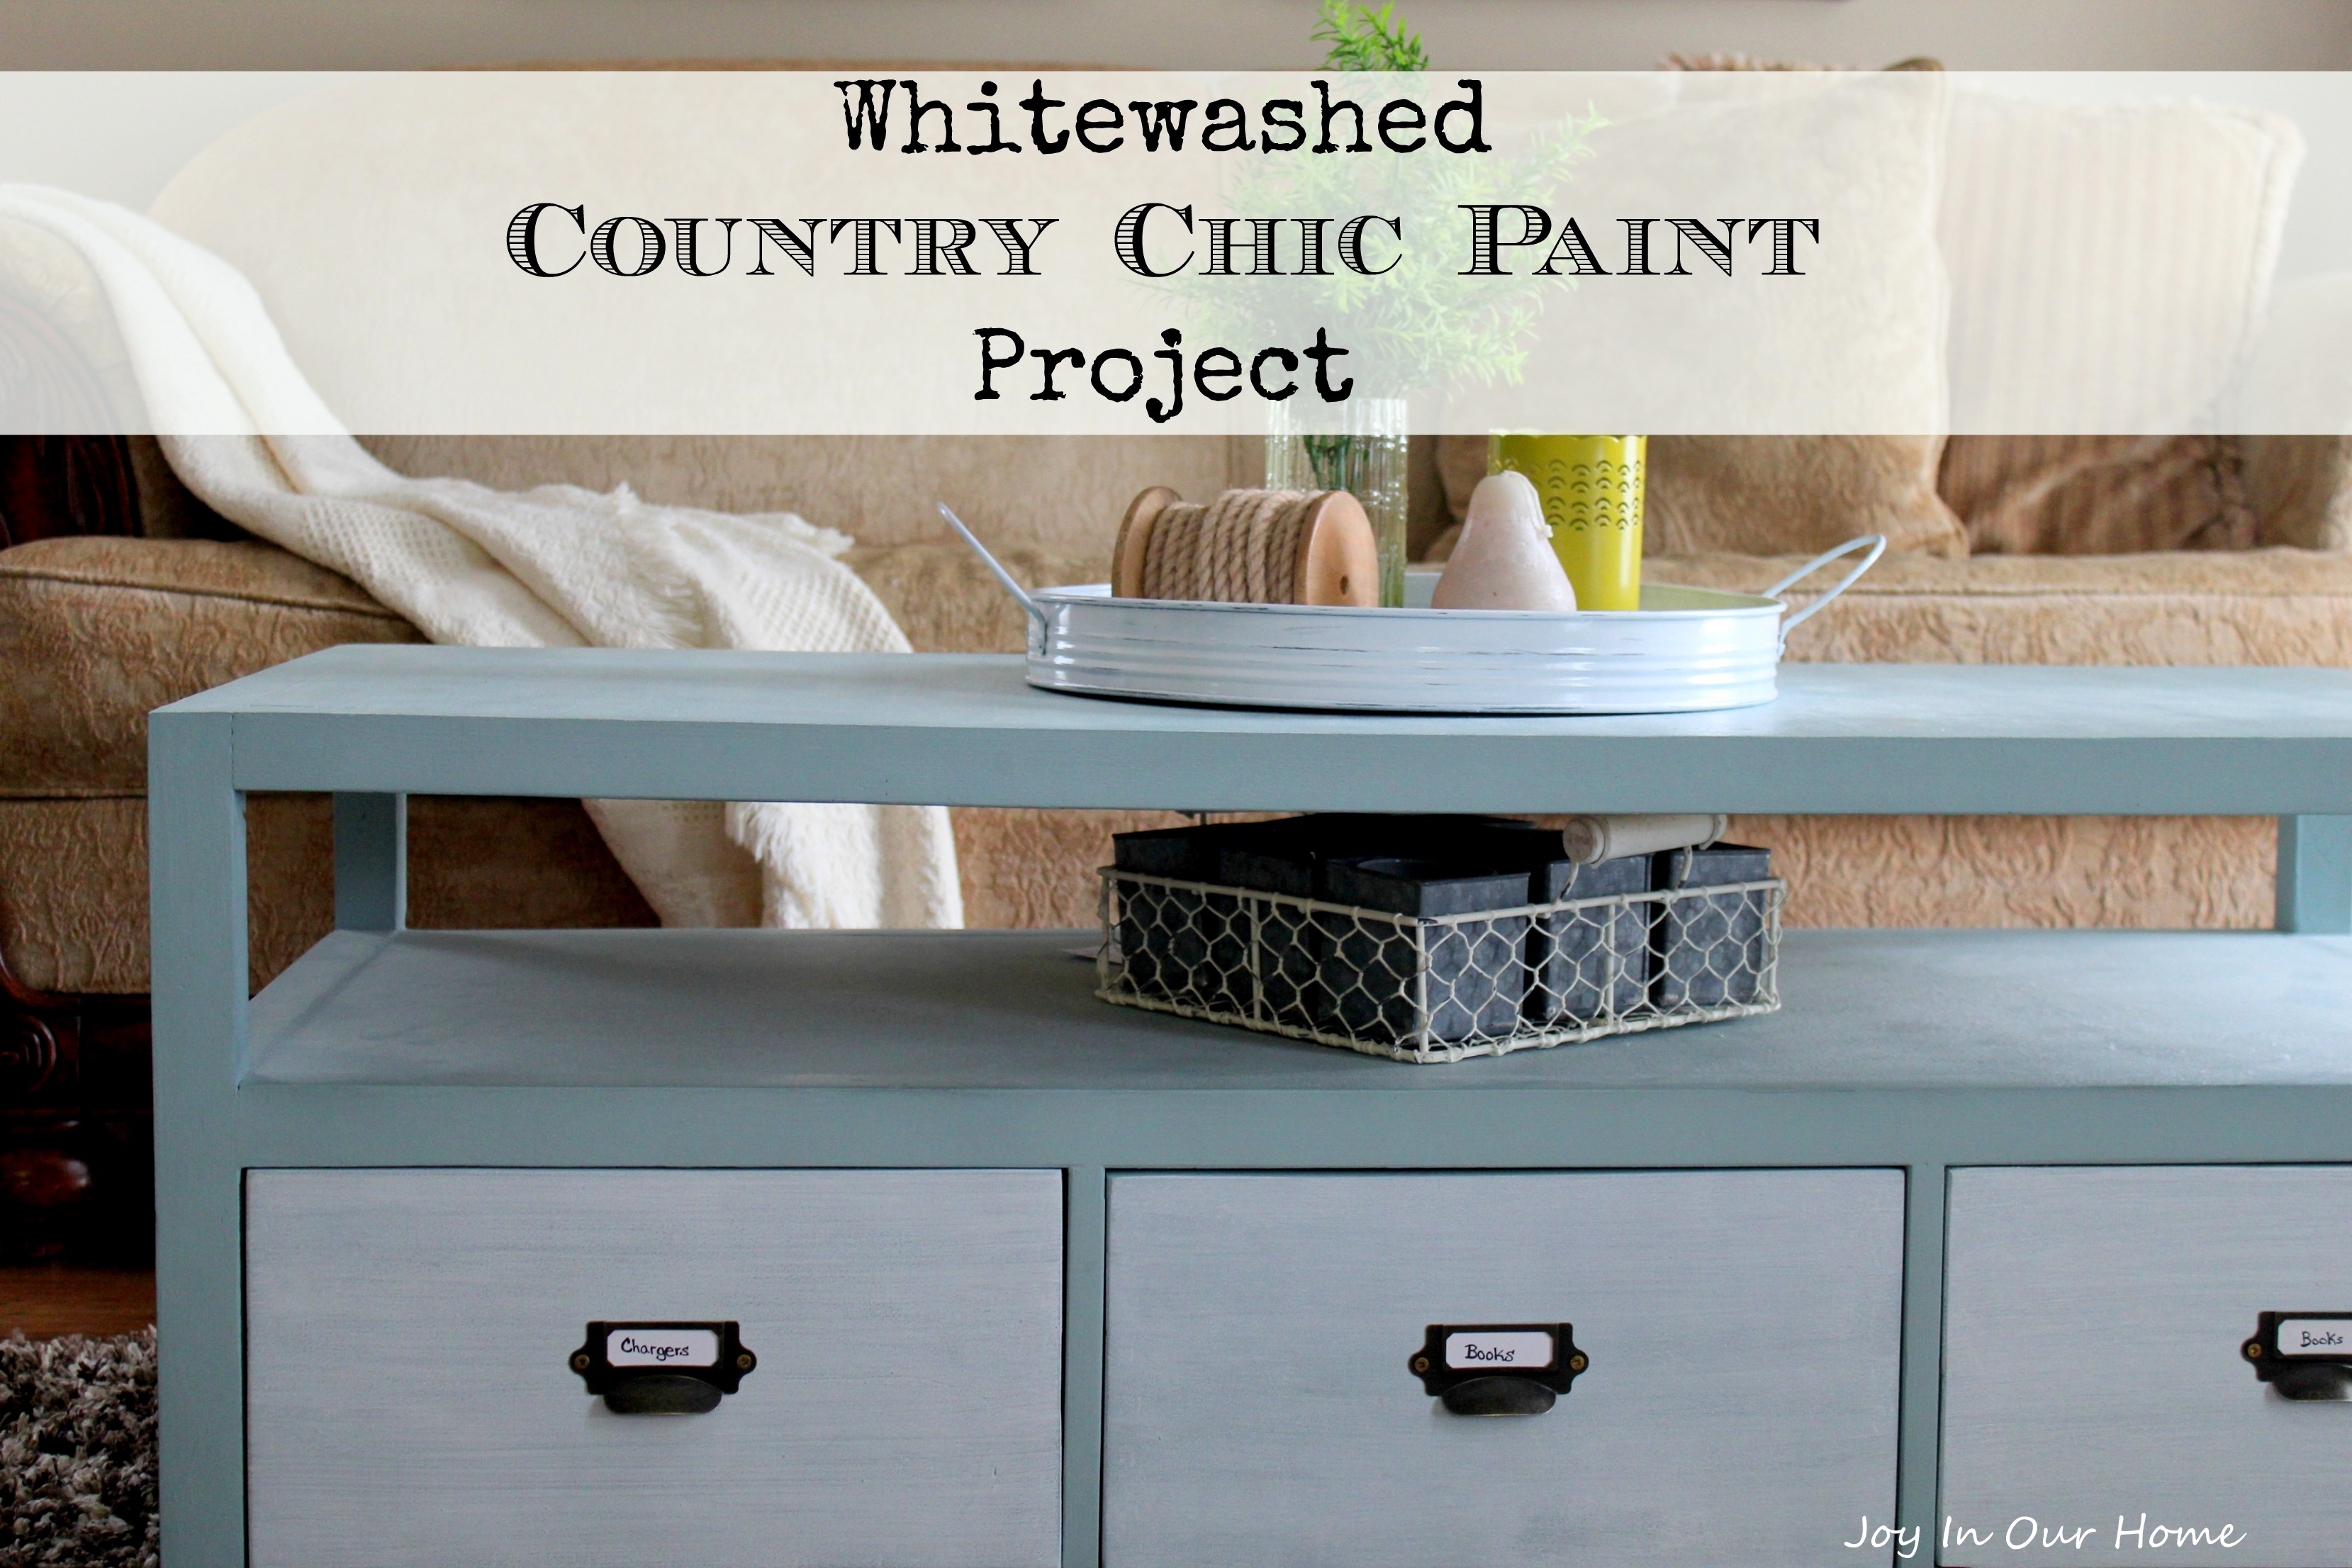 Whitewashed Country Chic Paint Project